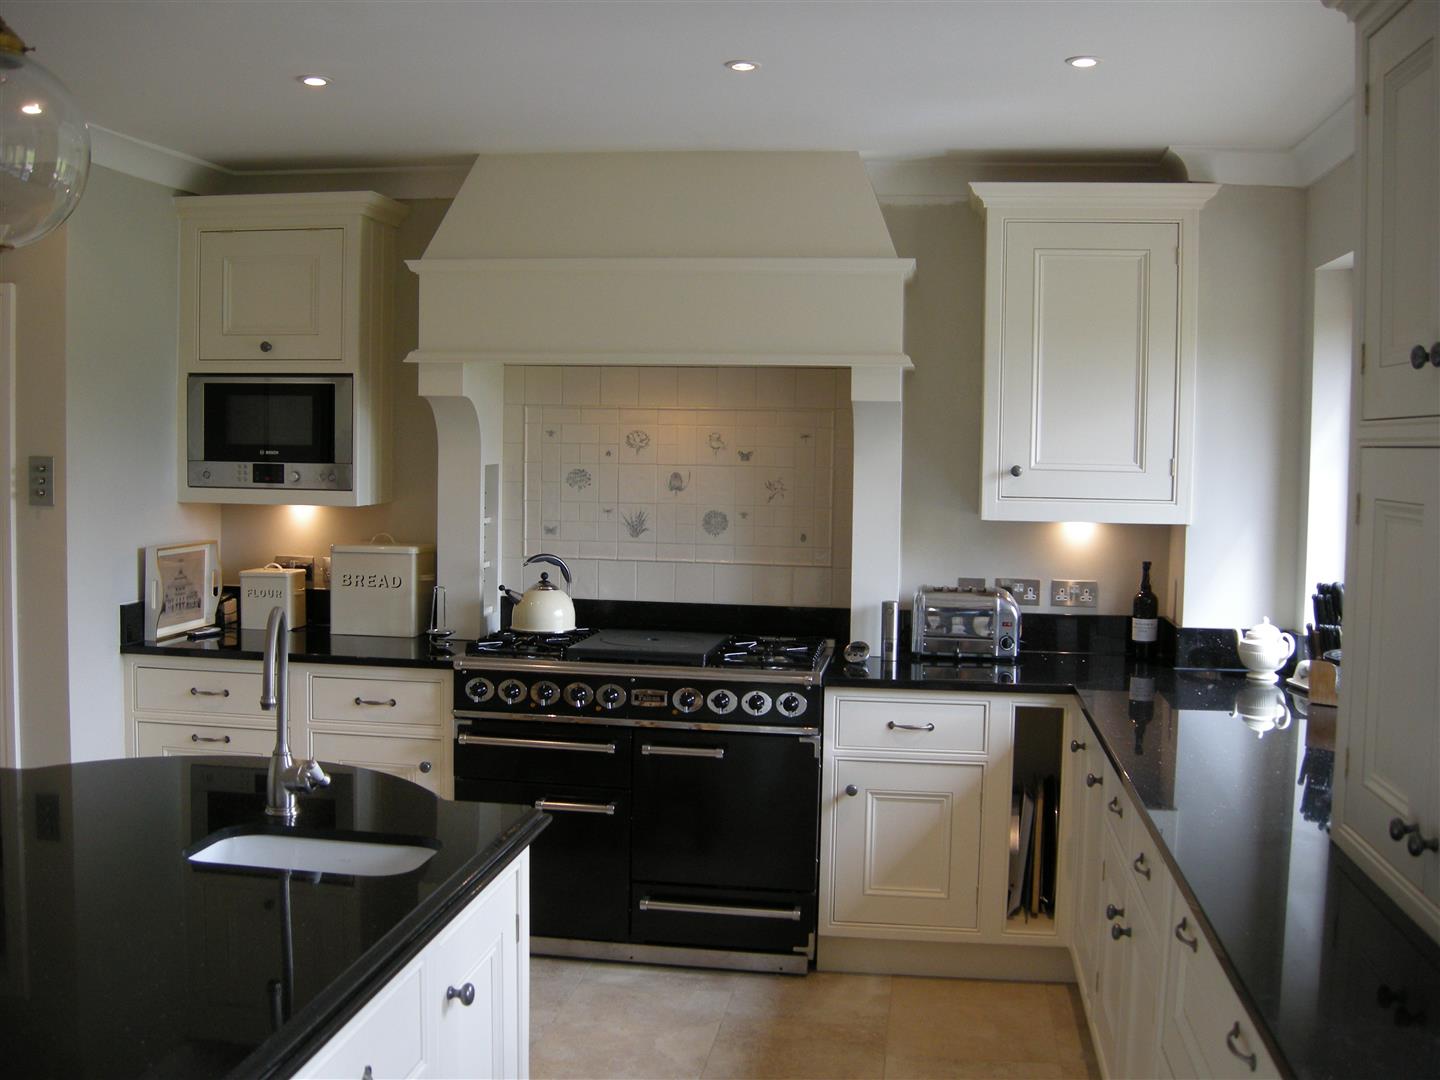 Redbrook kitchens design and install bespoke kitchens in Gloucestershire. Very large, stylish and full of features. Ballanced and easy to use kitchen